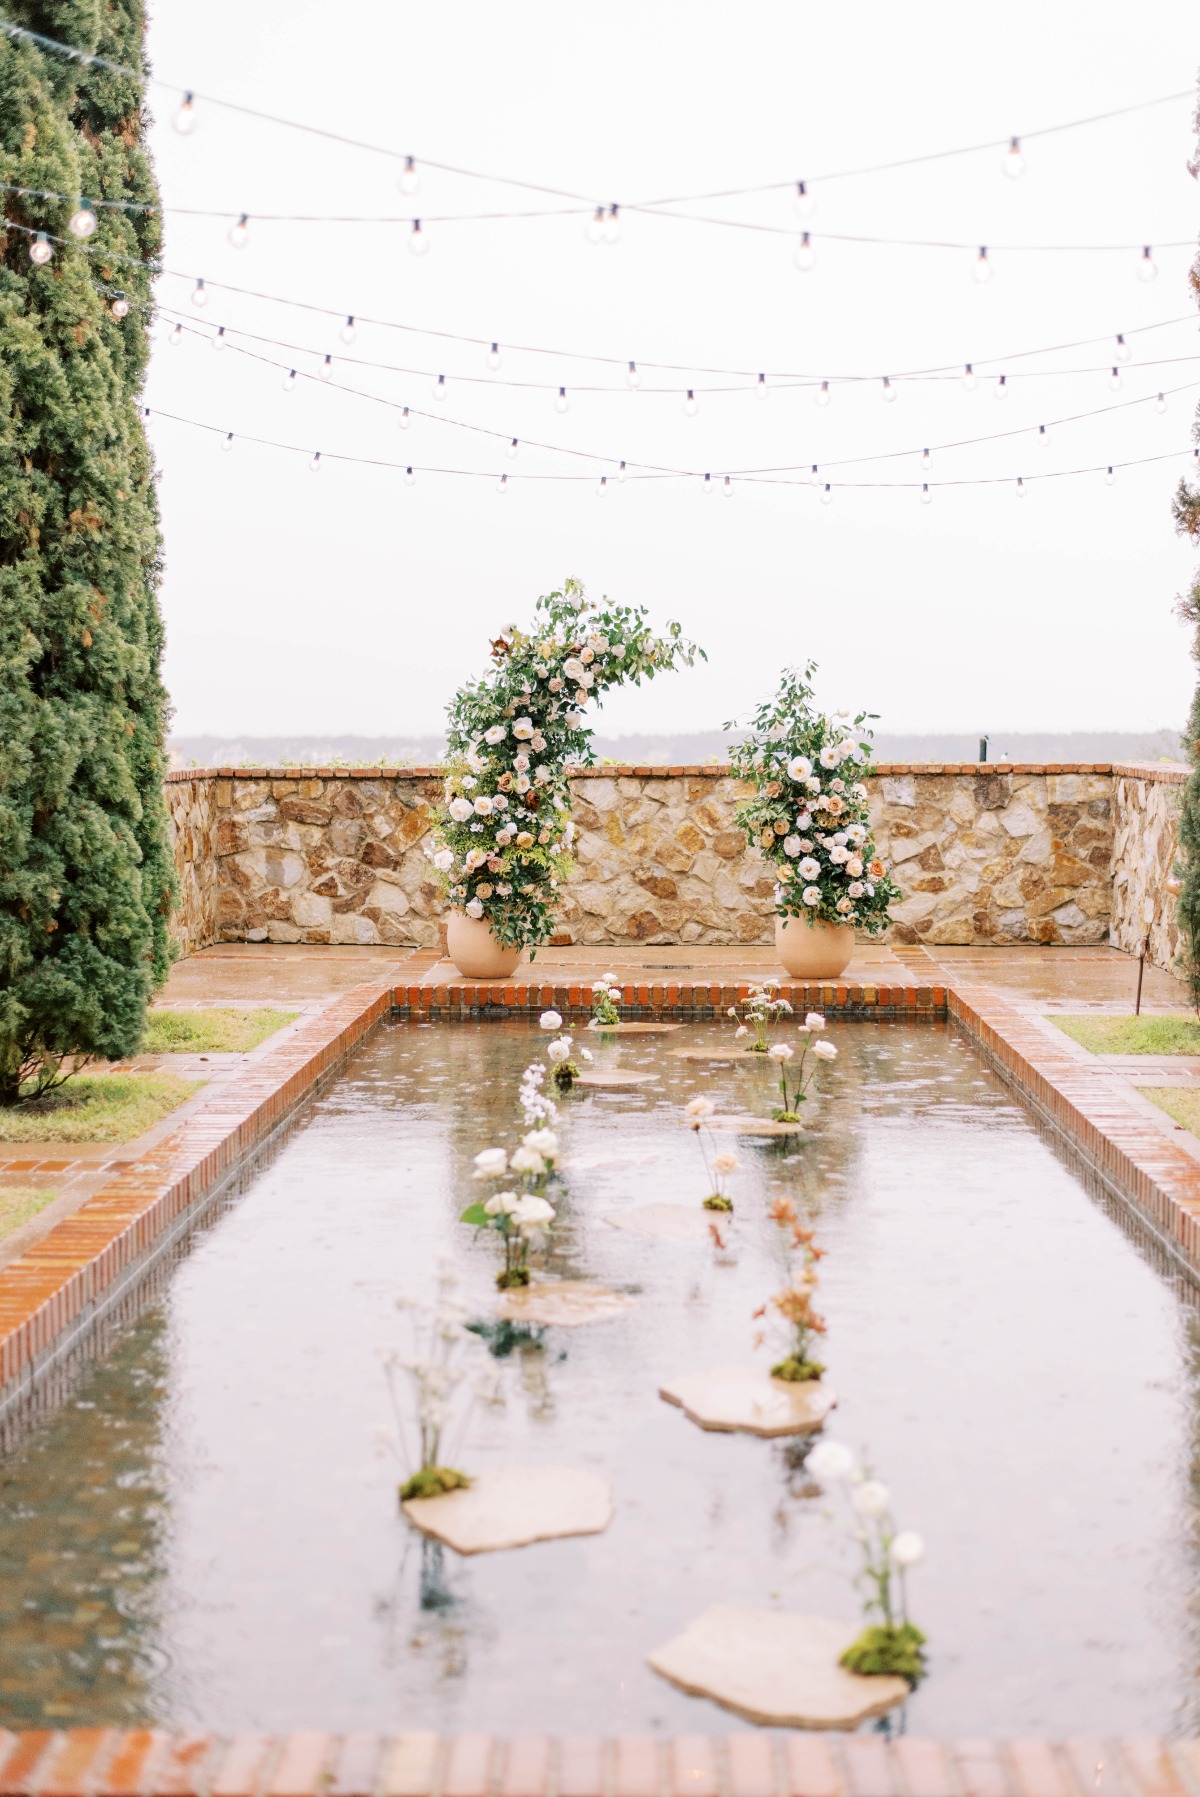 Ceremony space with string lights, floating flowers, and a pond